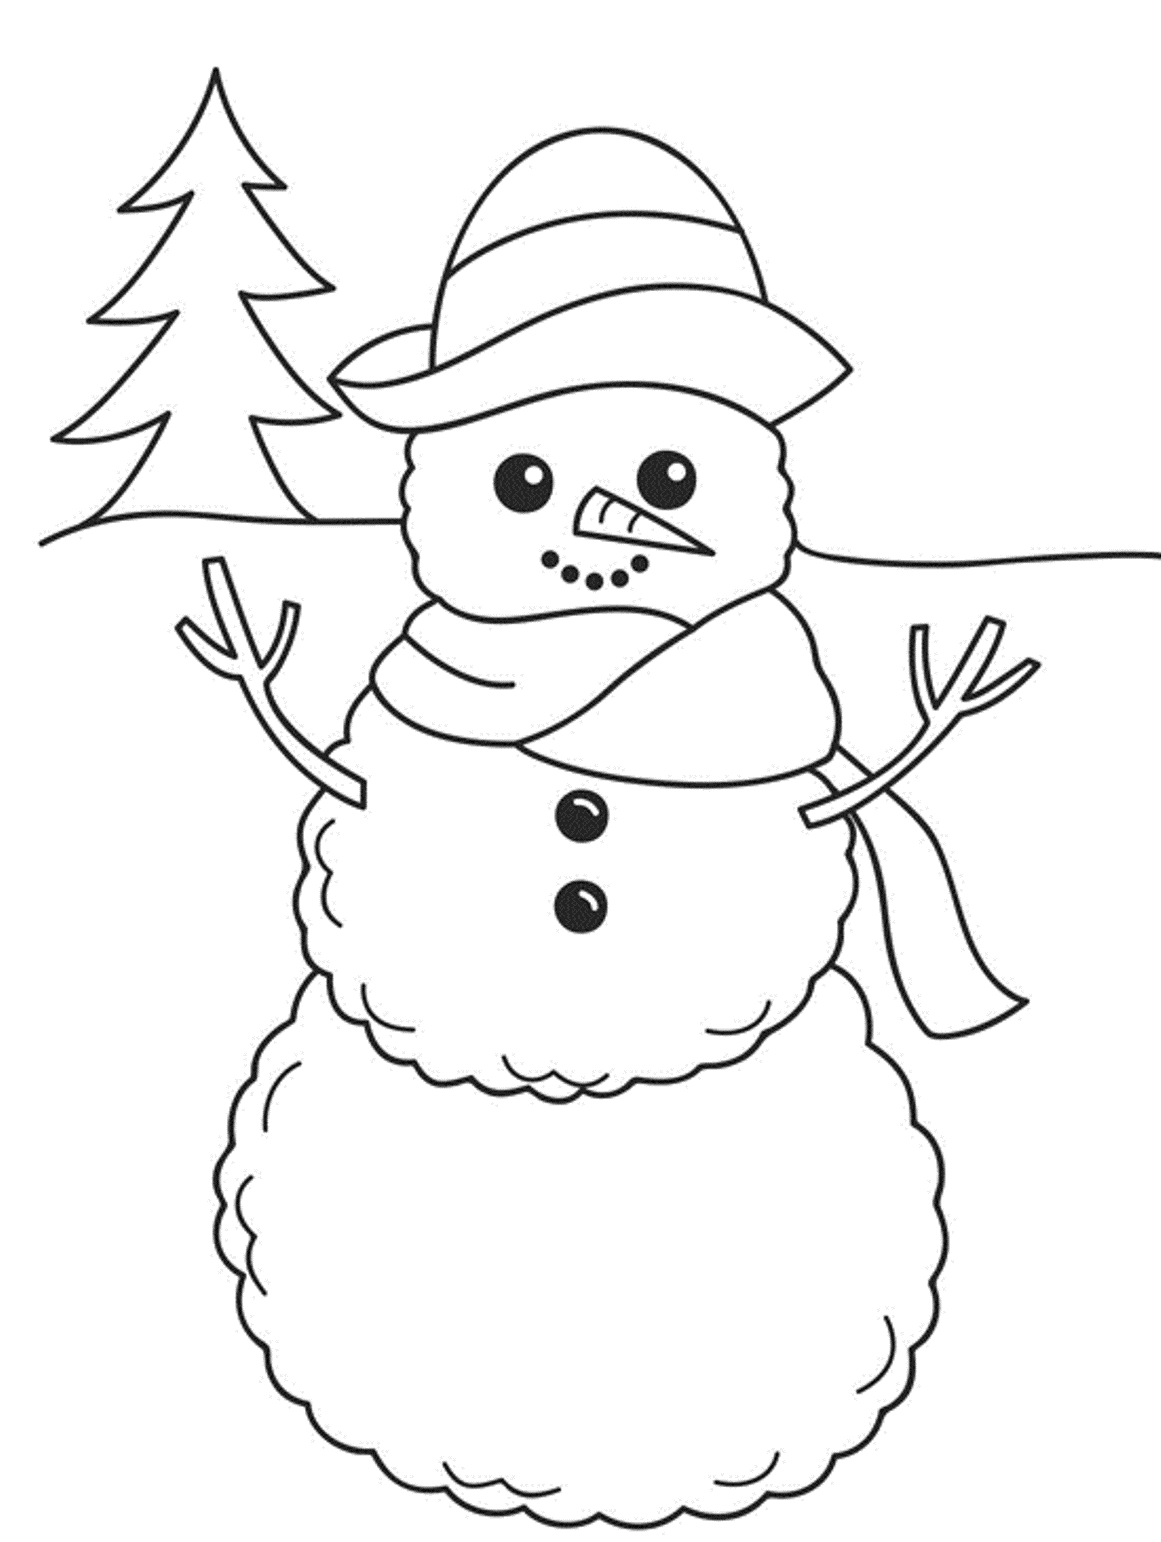 Christmas Winter Smiling Snowman Bbd7 Coloring Page